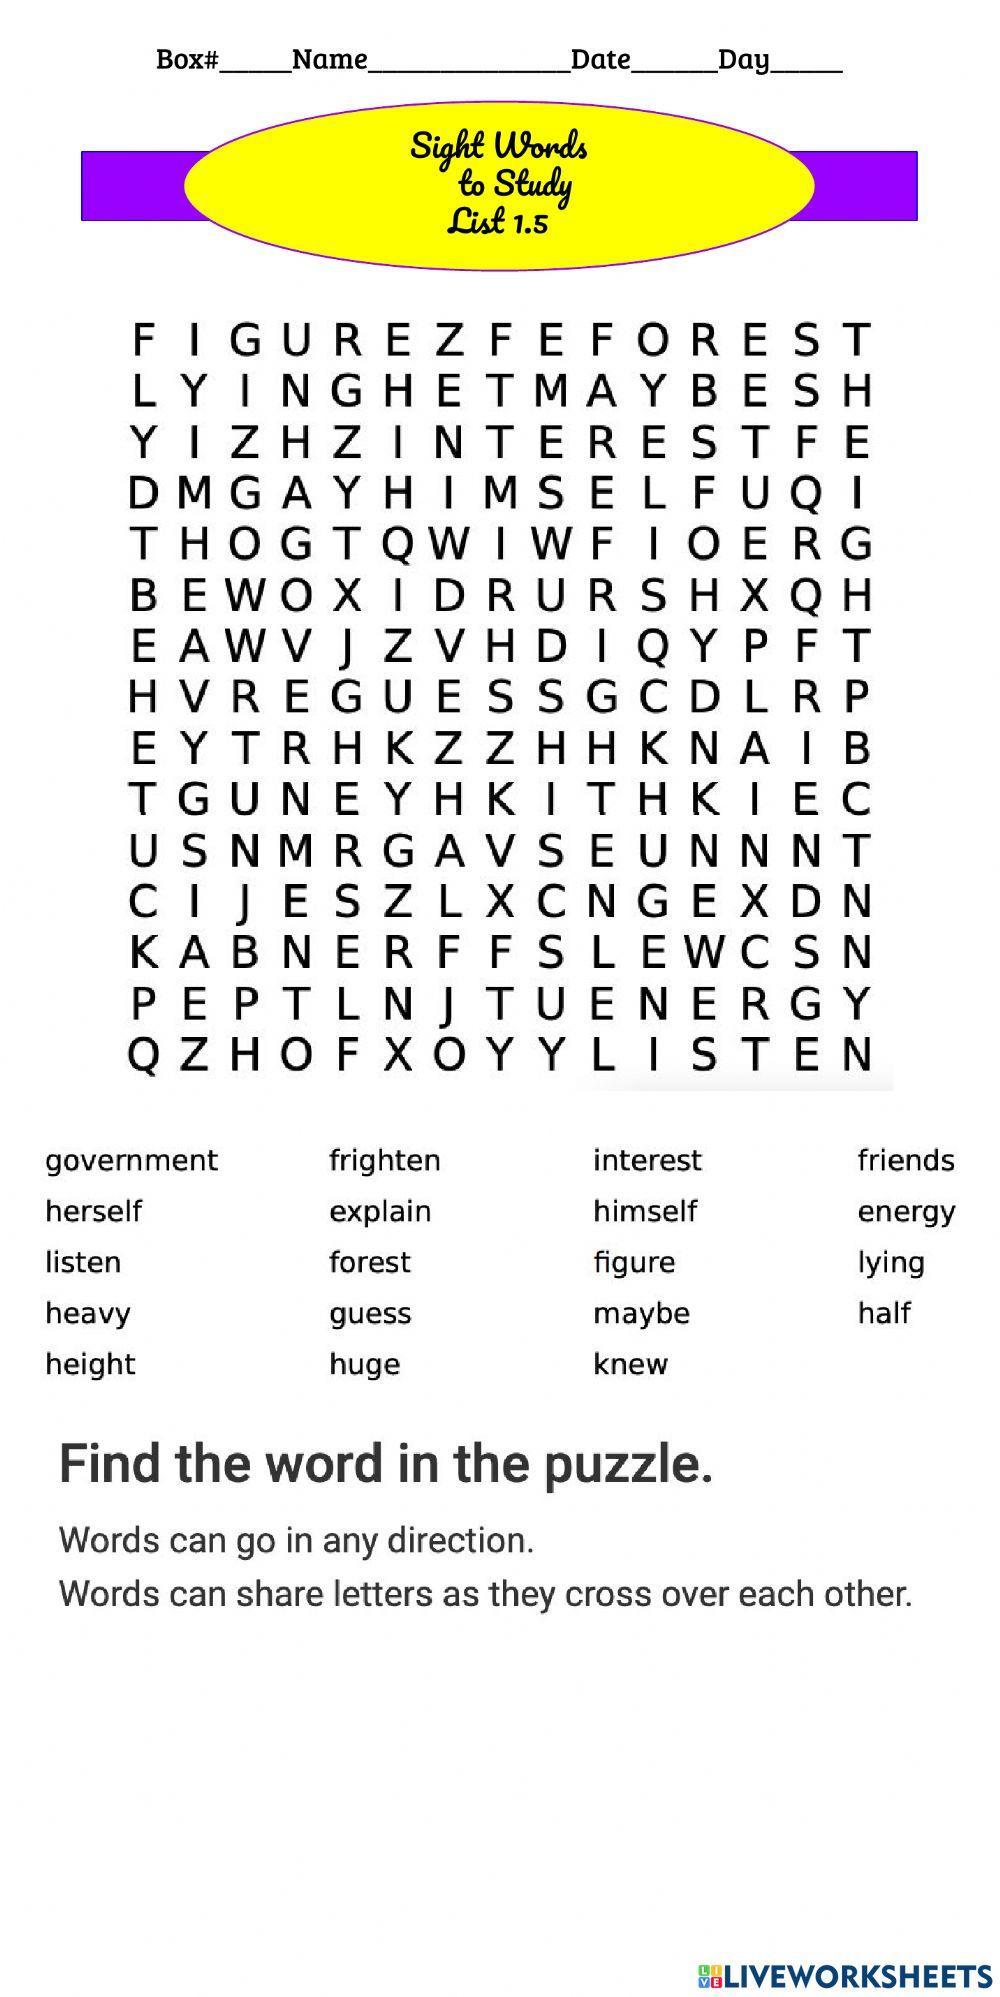 Sight Words 1.5 Word Search